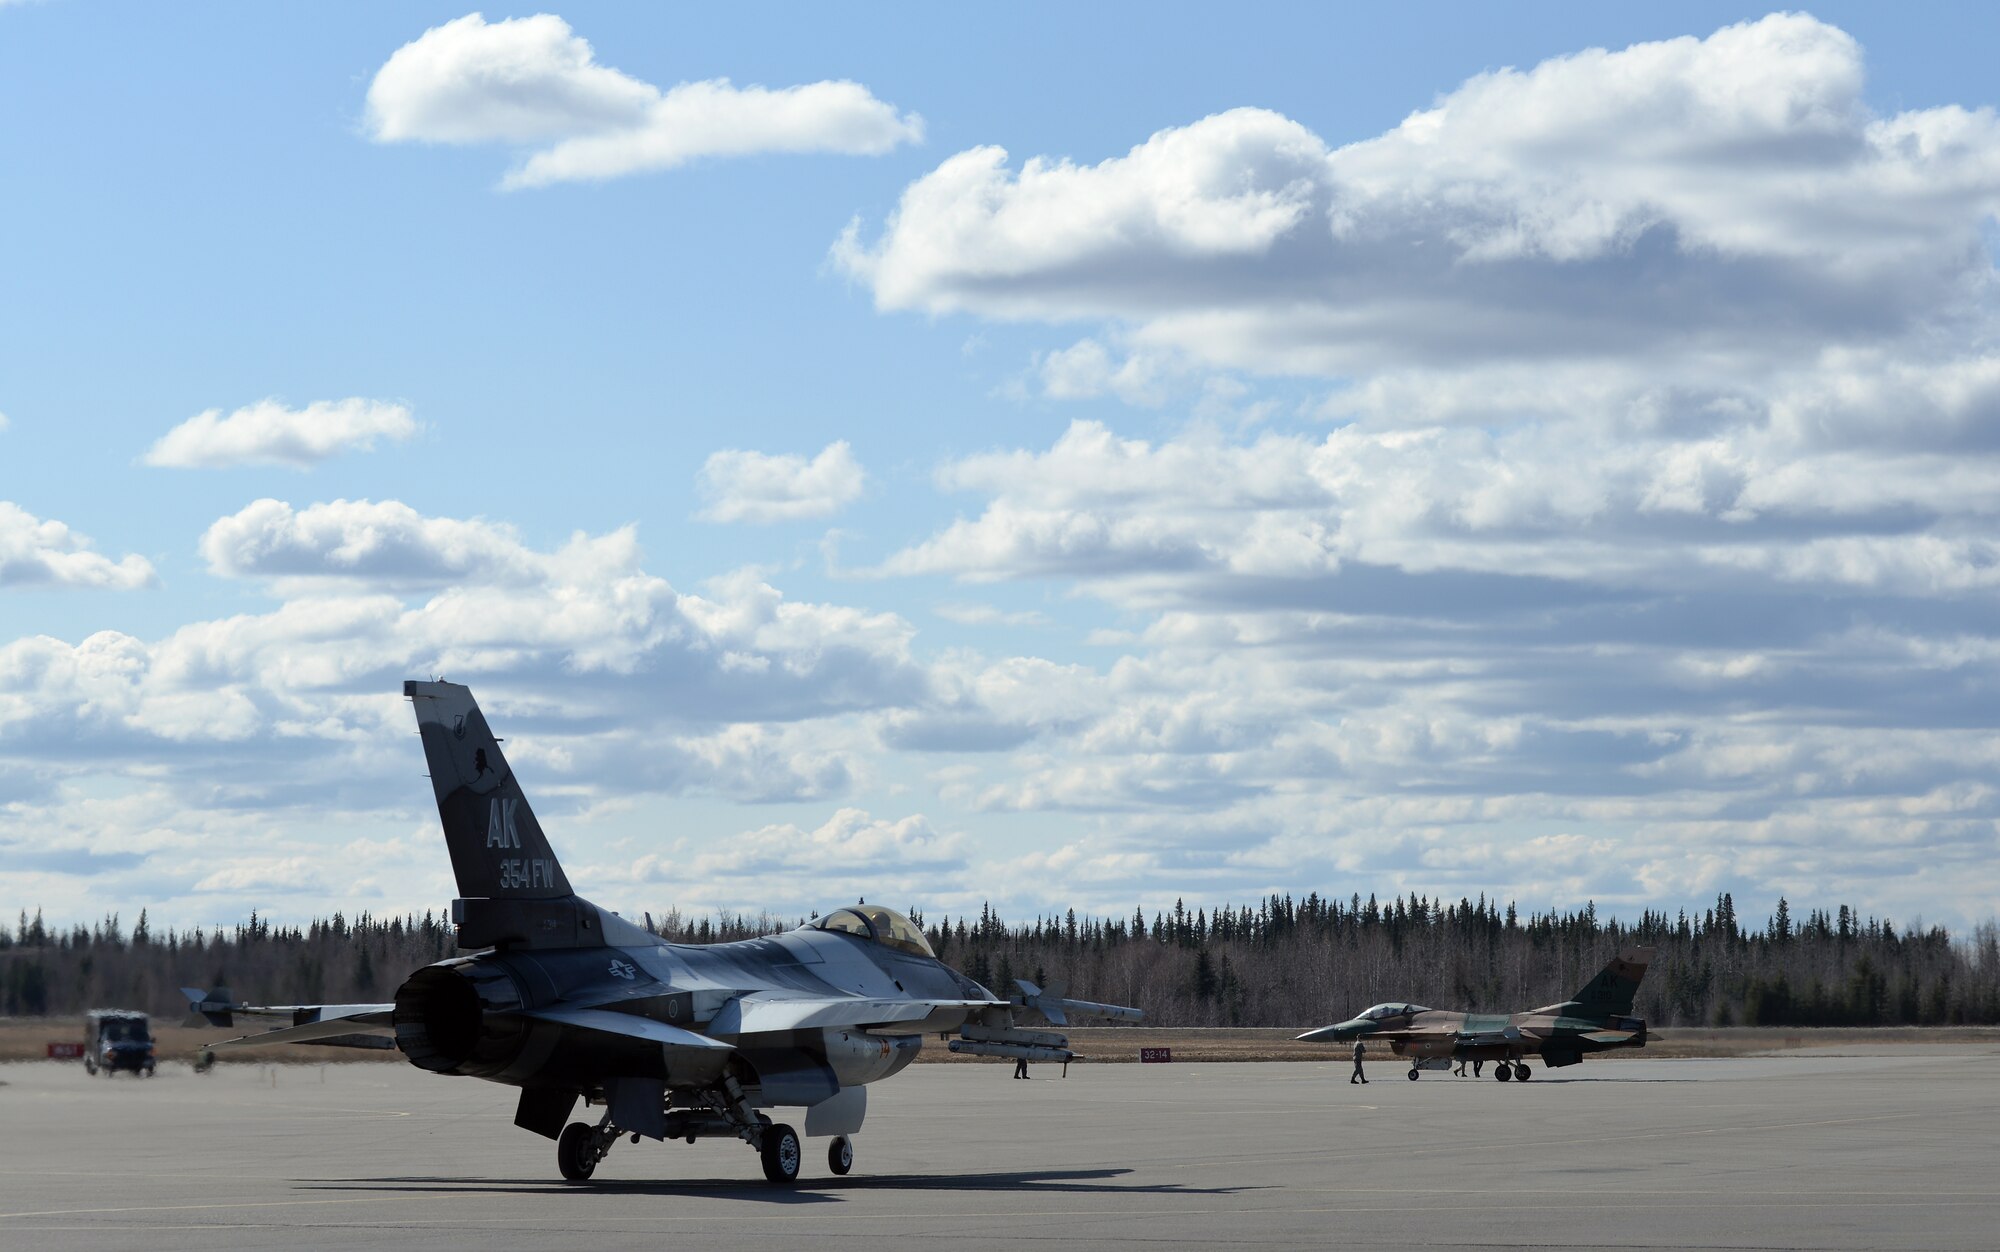 U.S. Air Force F-16 Fighting Falcon aircraft assigned to the 18th Aggressor Squadron taxi to the Eielson Air Force Base, Alaska, runway April 27, 2015, to participate in a Distant Frontier mission with F-16 pilots and aircraft deployed from the 113th Wing, District of Columbia Air National Guard. Distant Frontier provided the deployed pilots an opportunity to fly orientation flights in the more than 67,000 square-mile Joint Pacific Alaska Range Complex, become familiar with local flying restrictions, receive local safety and survival briefings, and develop orientation plans during the week prior to RED FLAG-Alaska 15-2, a Pacific Air Forces-directed field training exercise flown under simulated air combat conditions to increases combat capability. (U.S. Air Force photo by Master Sgt. Karen J. Tomasik/Released)